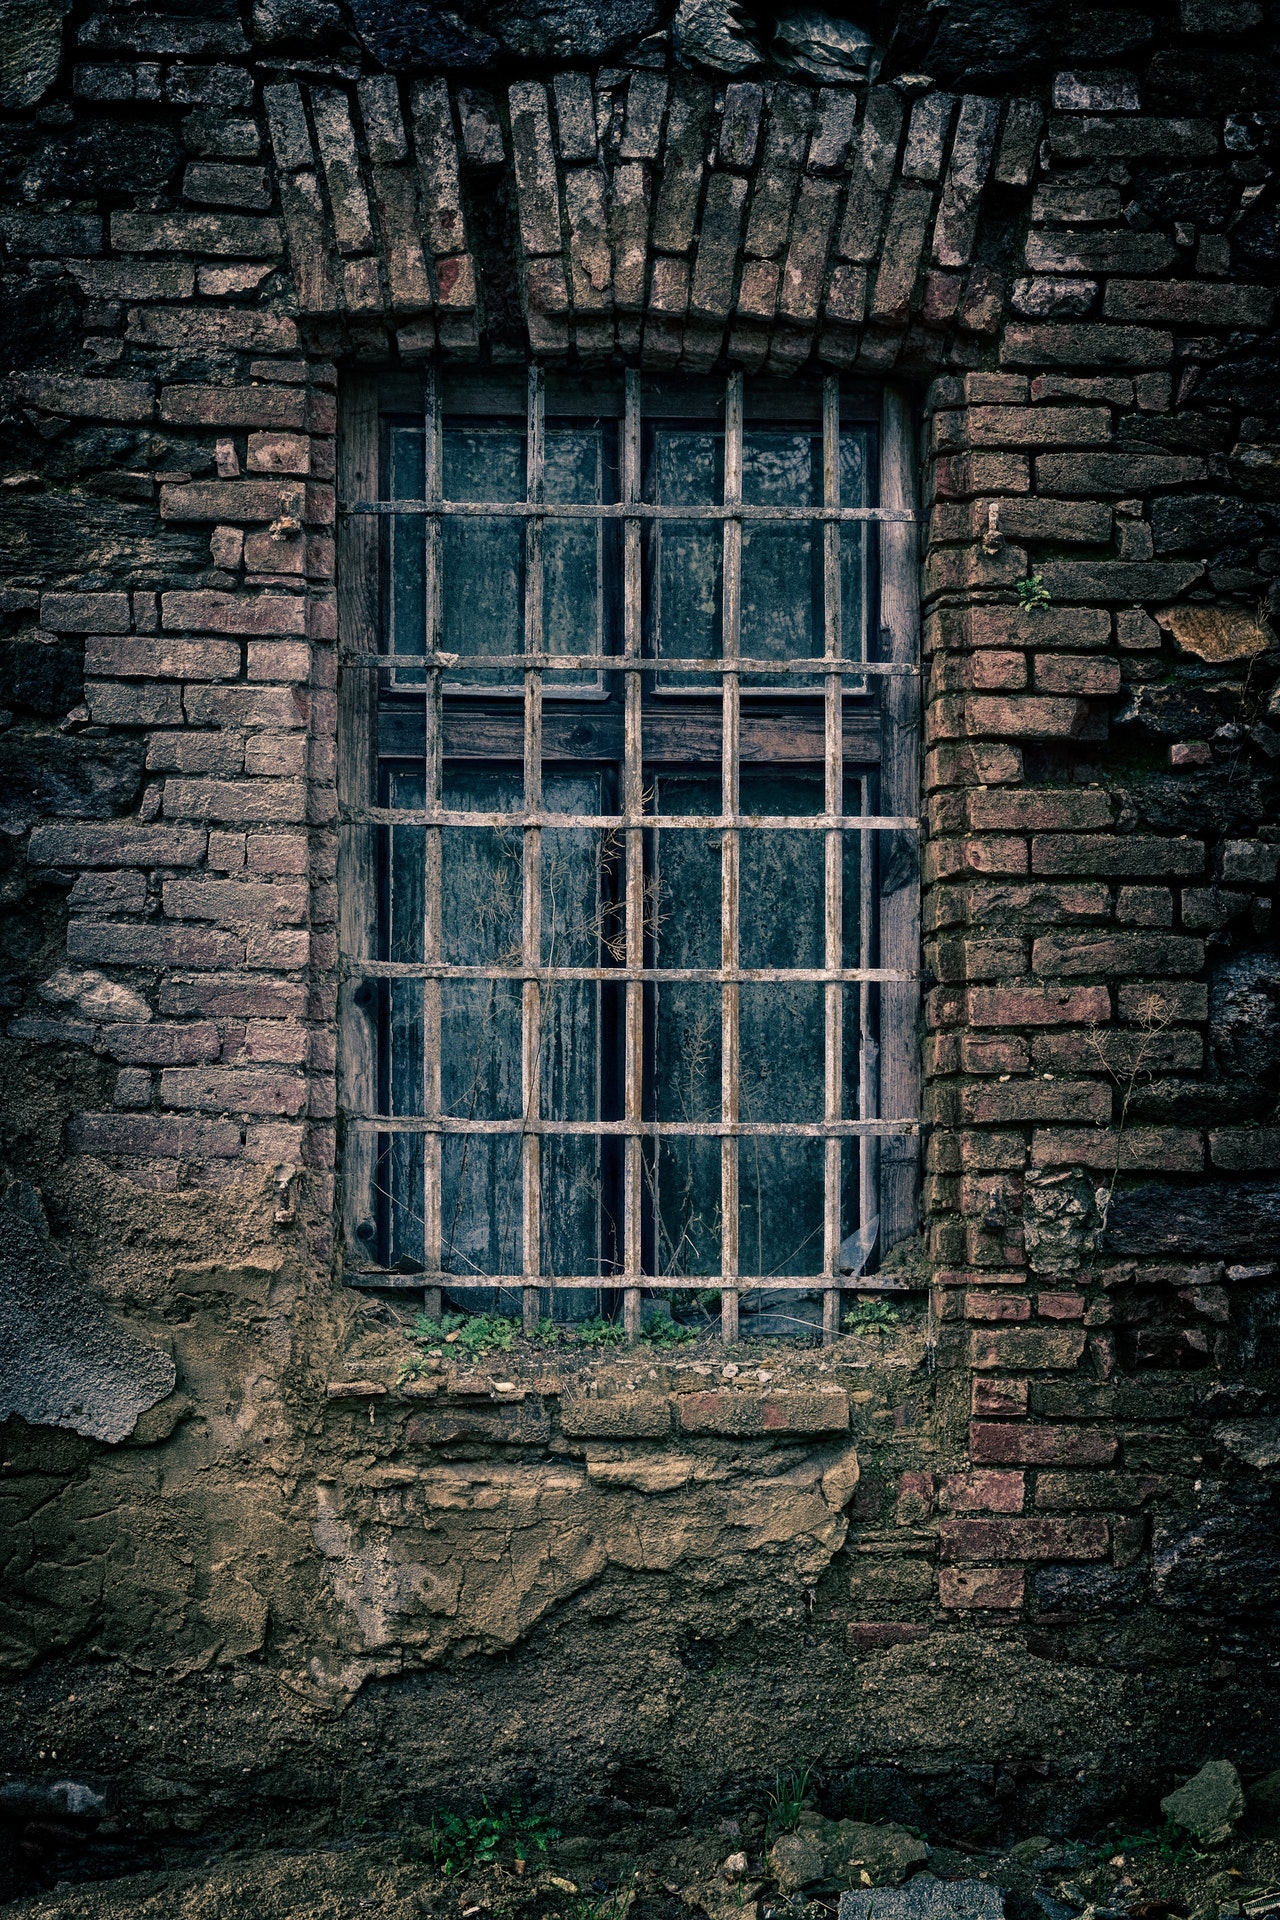 The window of a prison cell